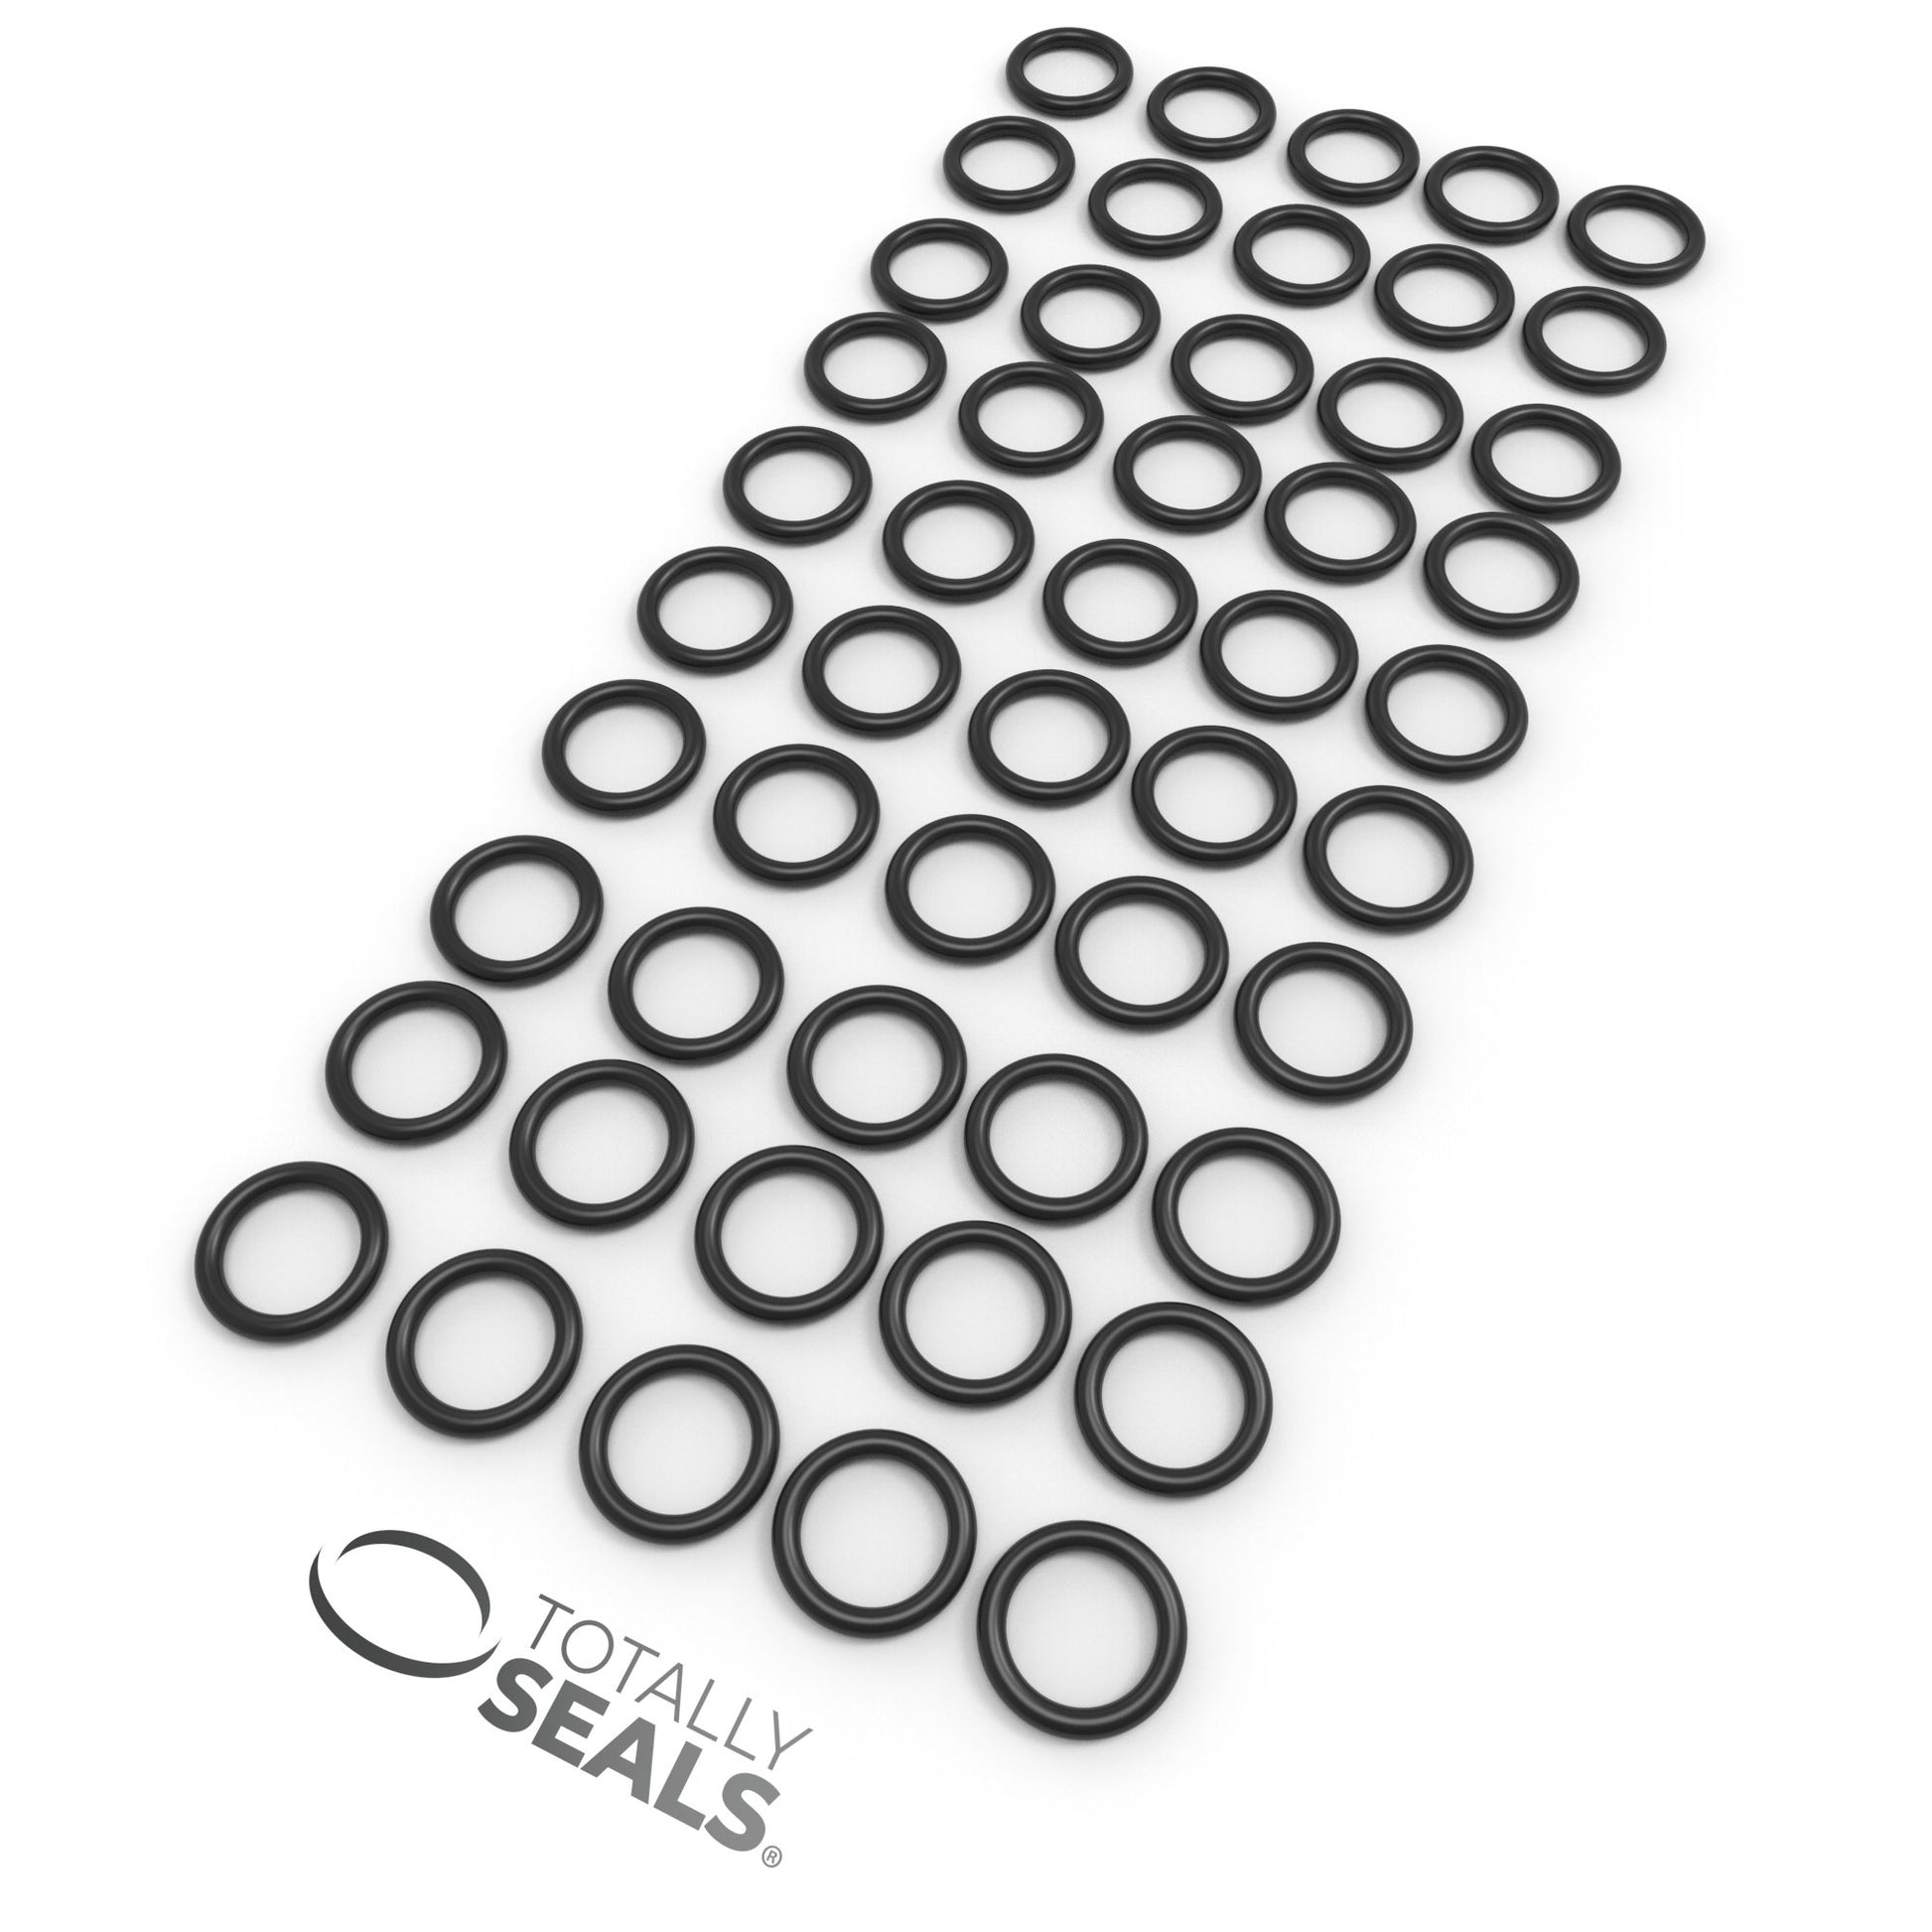 22mm x 3mm (28mm OD) Nitrile O-Rings - Totally Seals®